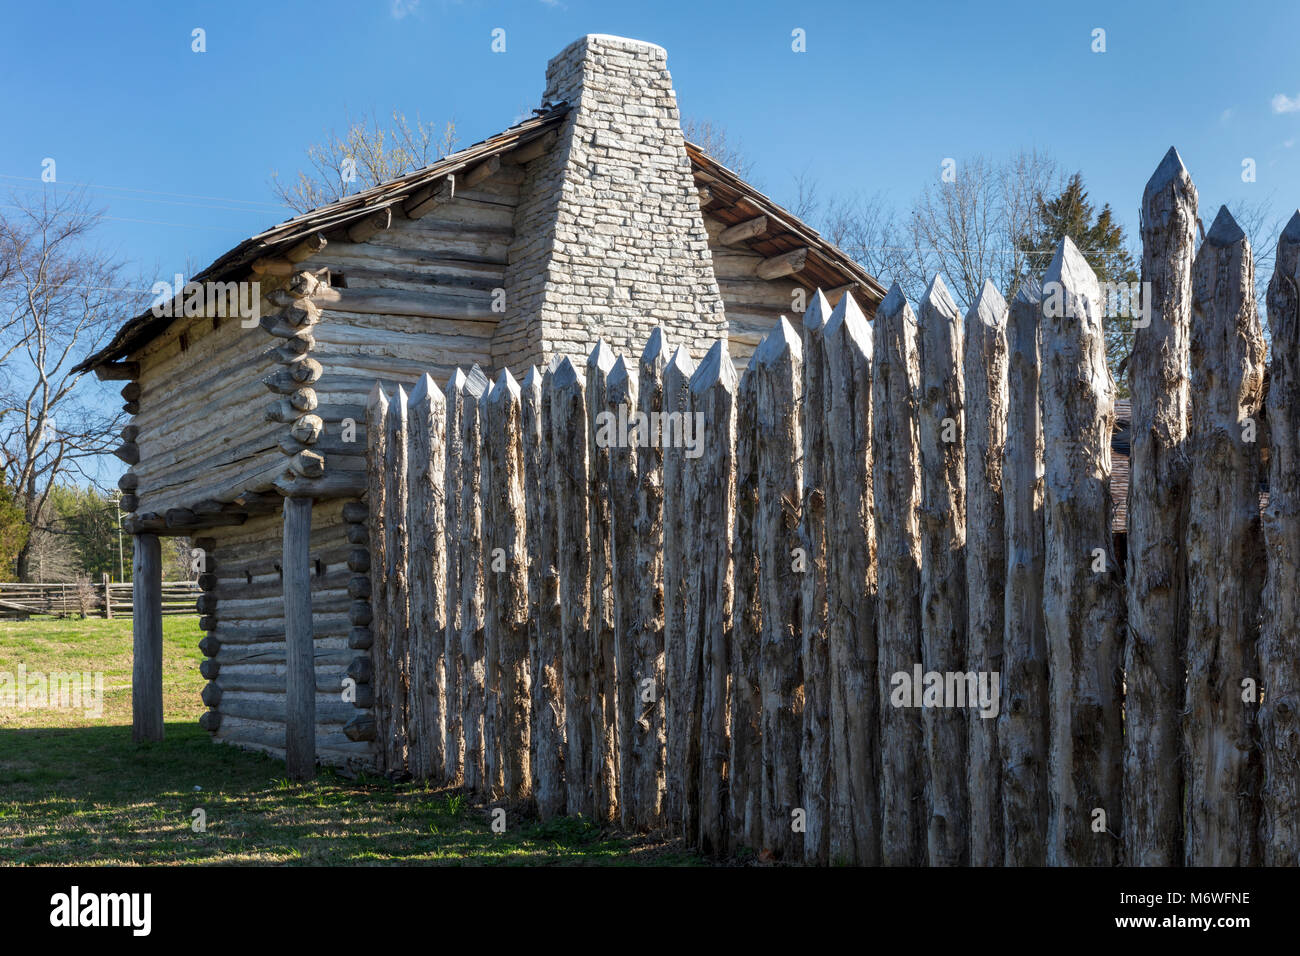 Mansker's Station - a reproduction of the 18th C. American frontier fort about 10 miles north of Nashville in Goodlettsville, Tennessee, USA Stock Photo